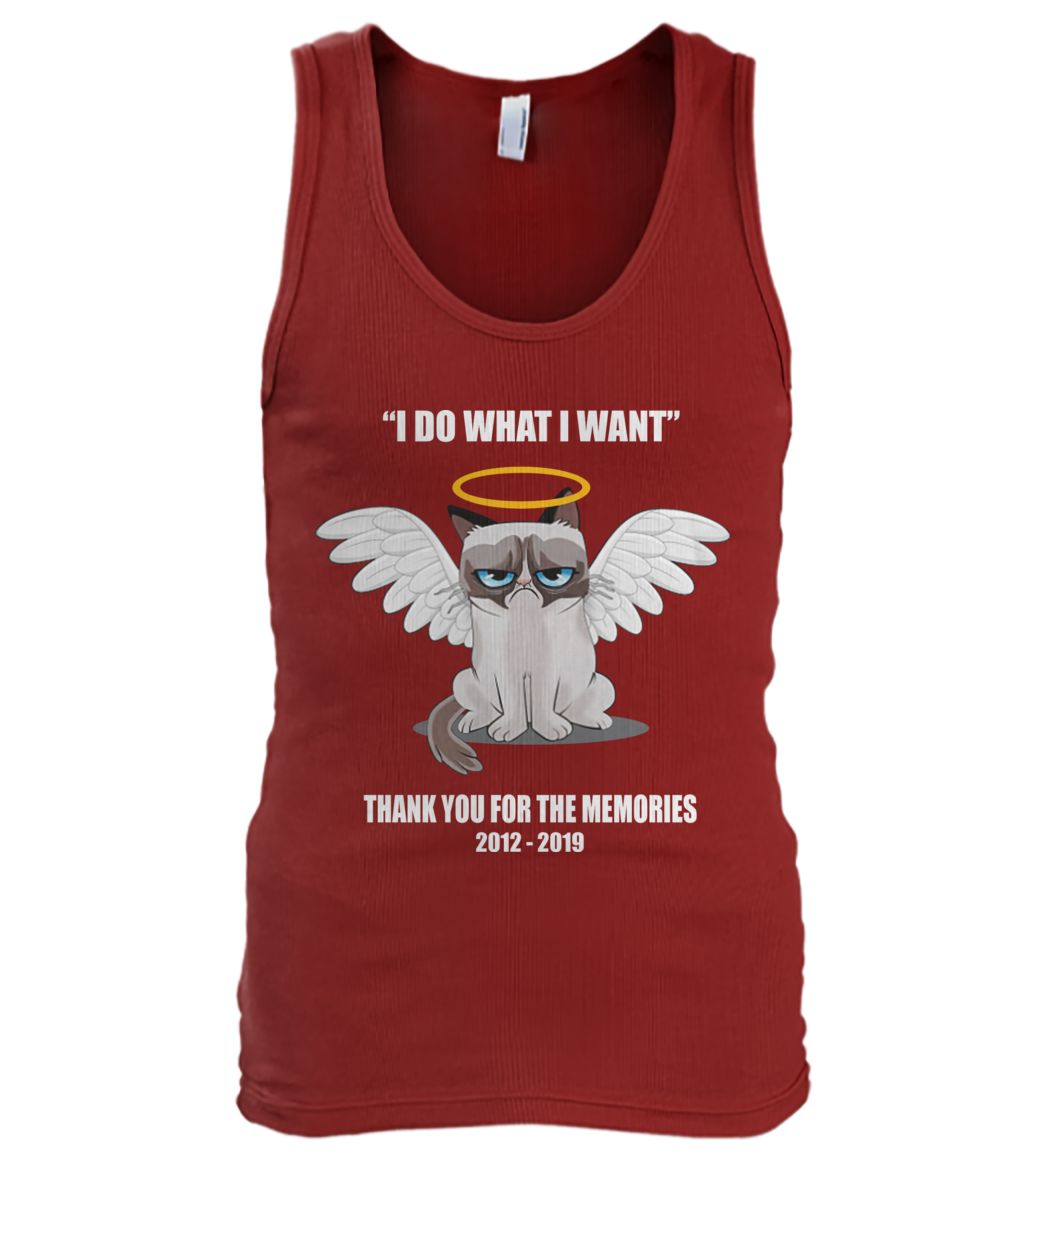 Grumpy cat I do what I want thank you for the memories men's tank top